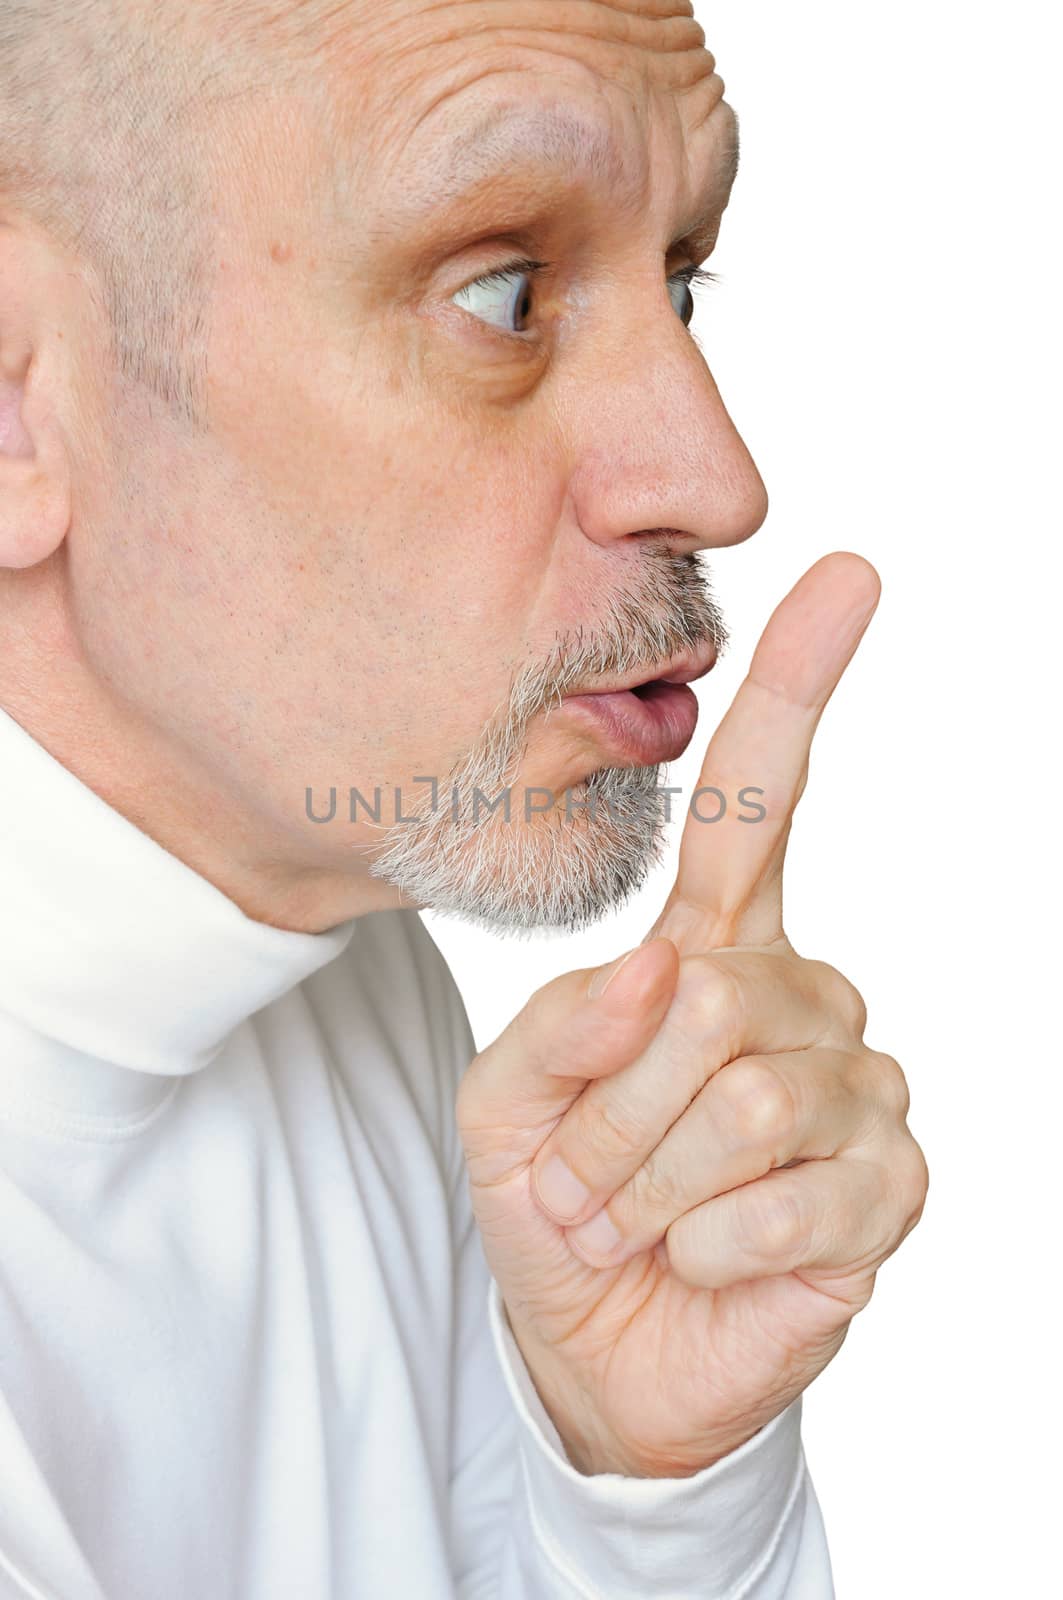 Man intimating silence, making "hush!" with the finger in front of the lips